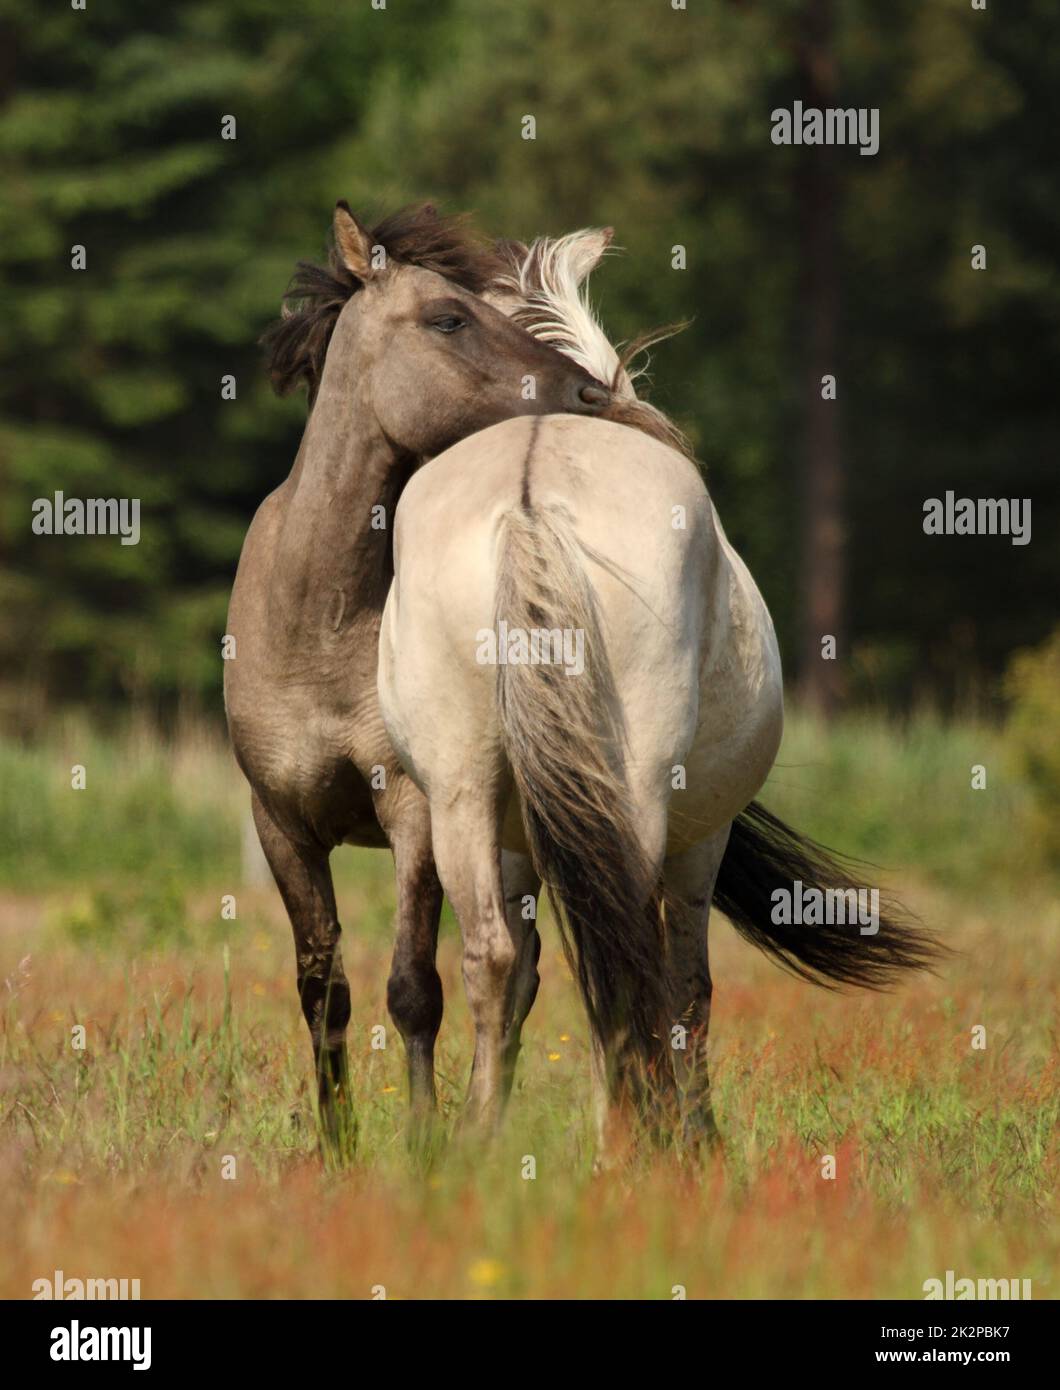 A portrait of two wild horses - Equus ferus - in Marielyst reservation, Denmark Stock Photo